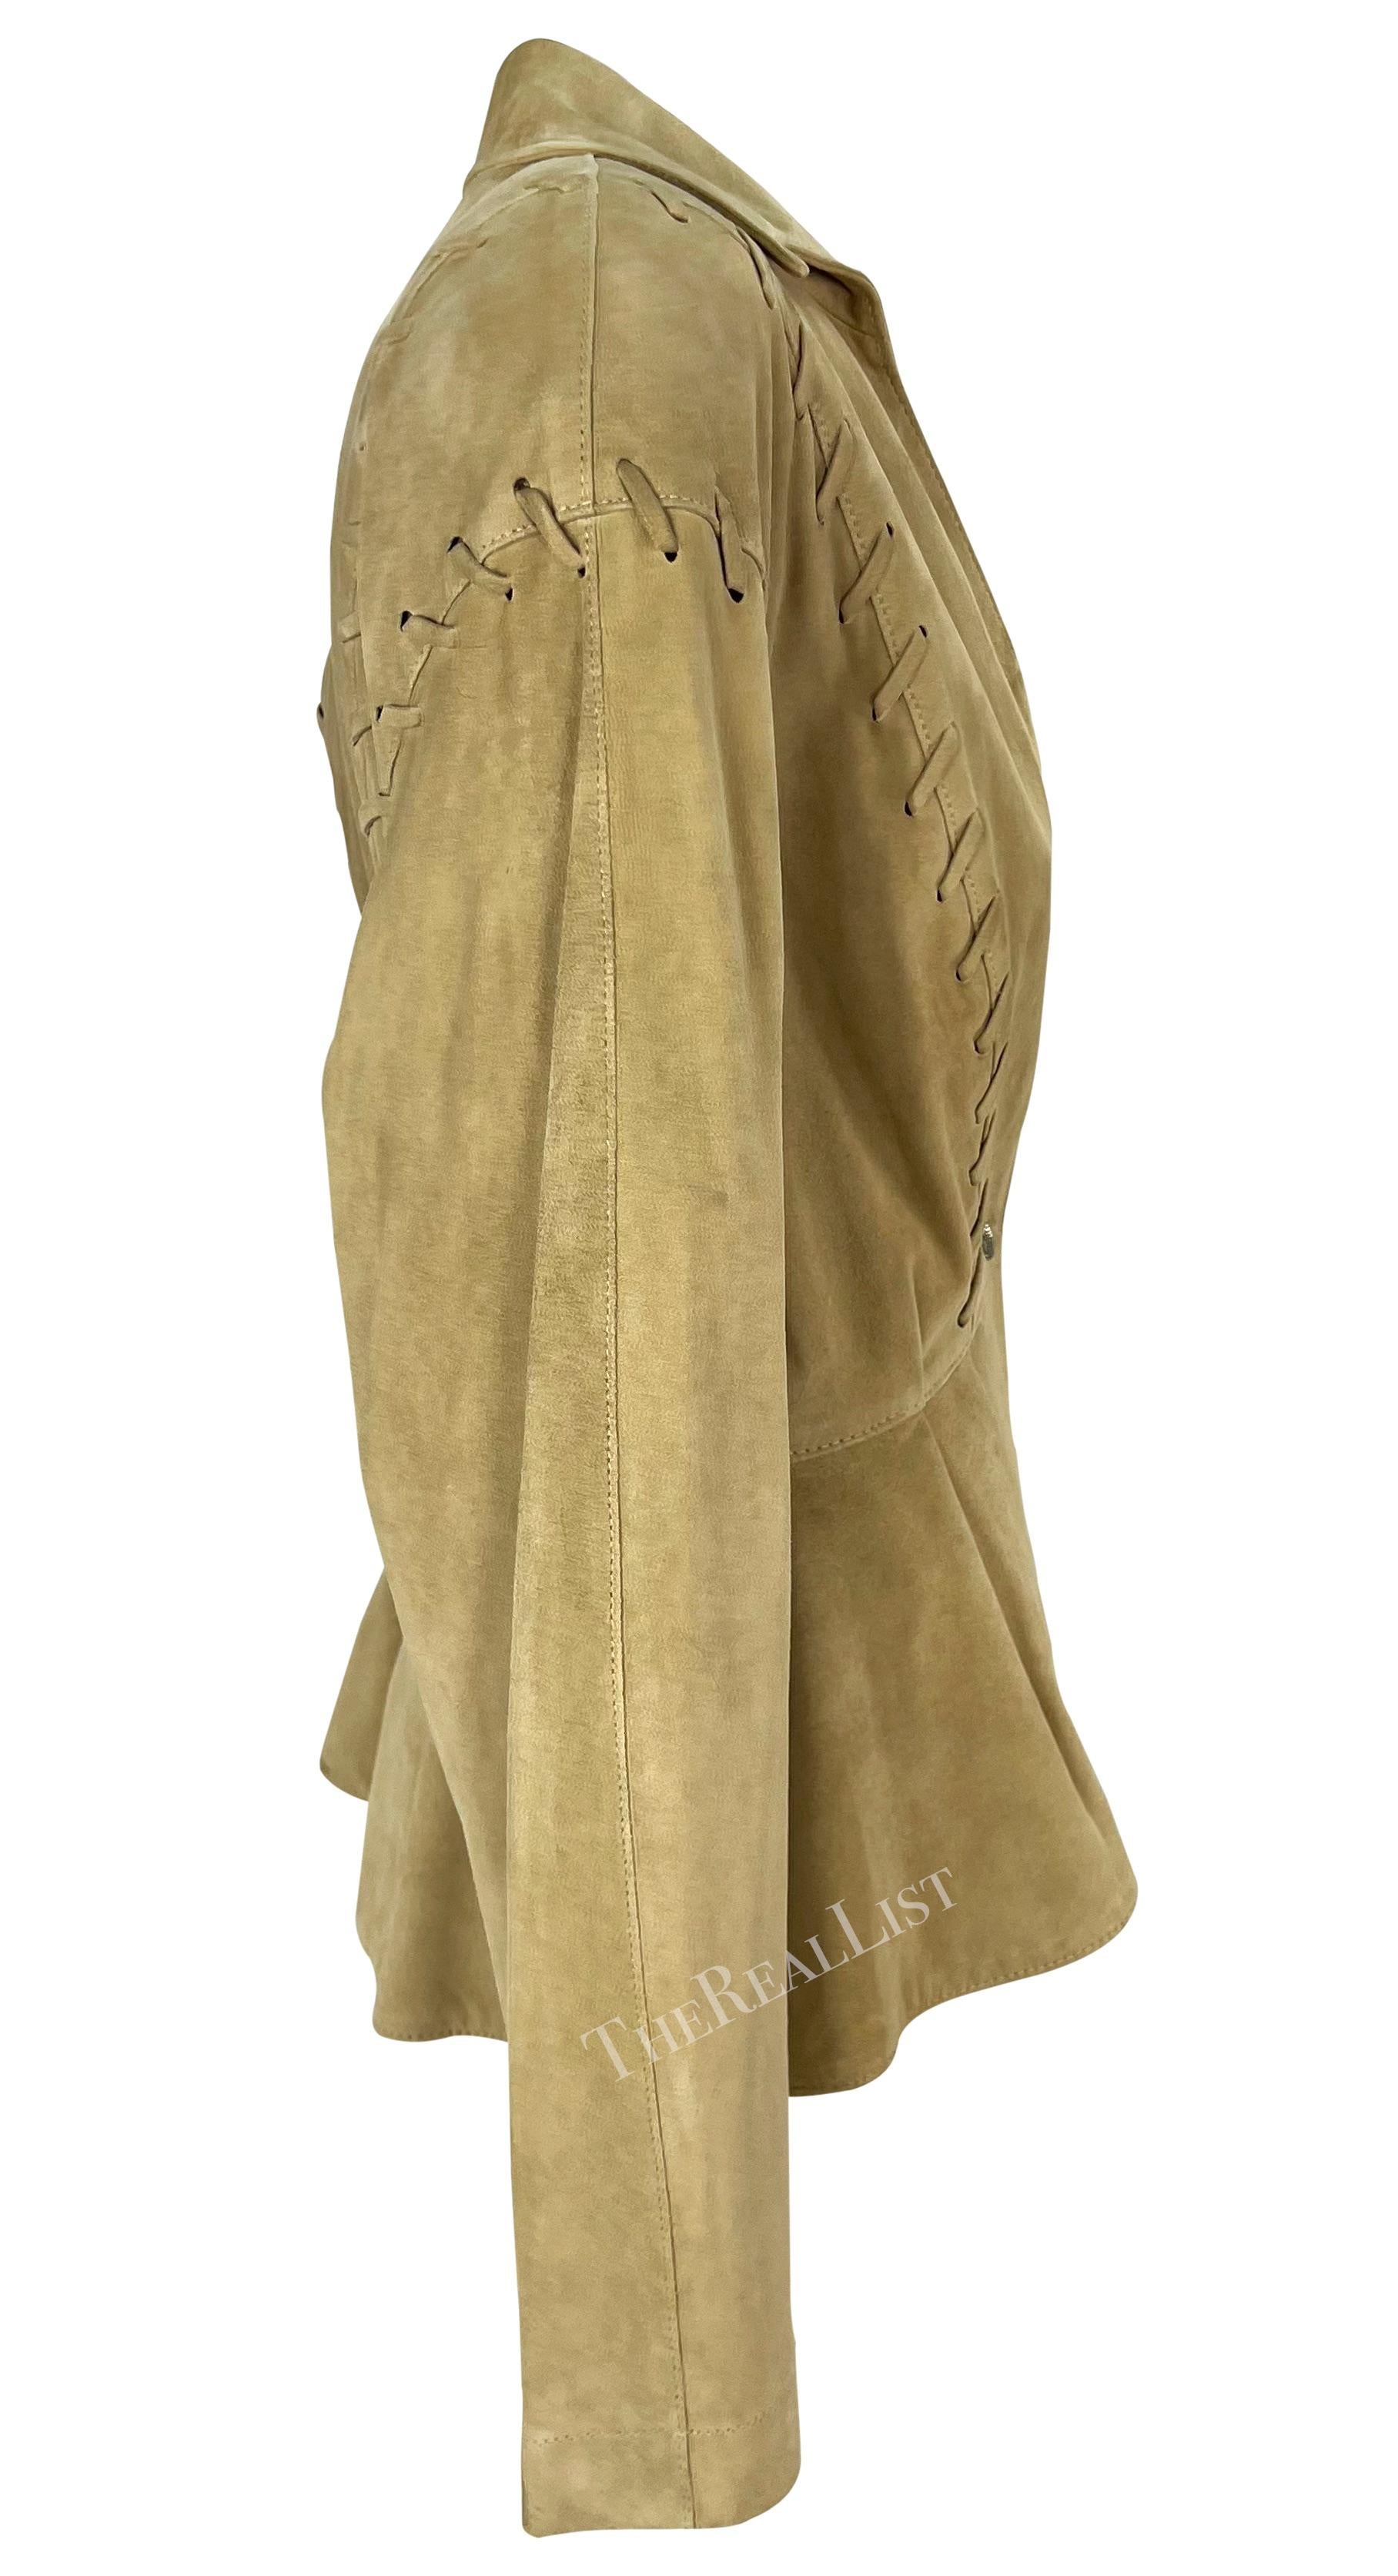 1990s Thierry Mugler Tan Suede Leather Plunging Western Whipstitch Jacket For Sale 2